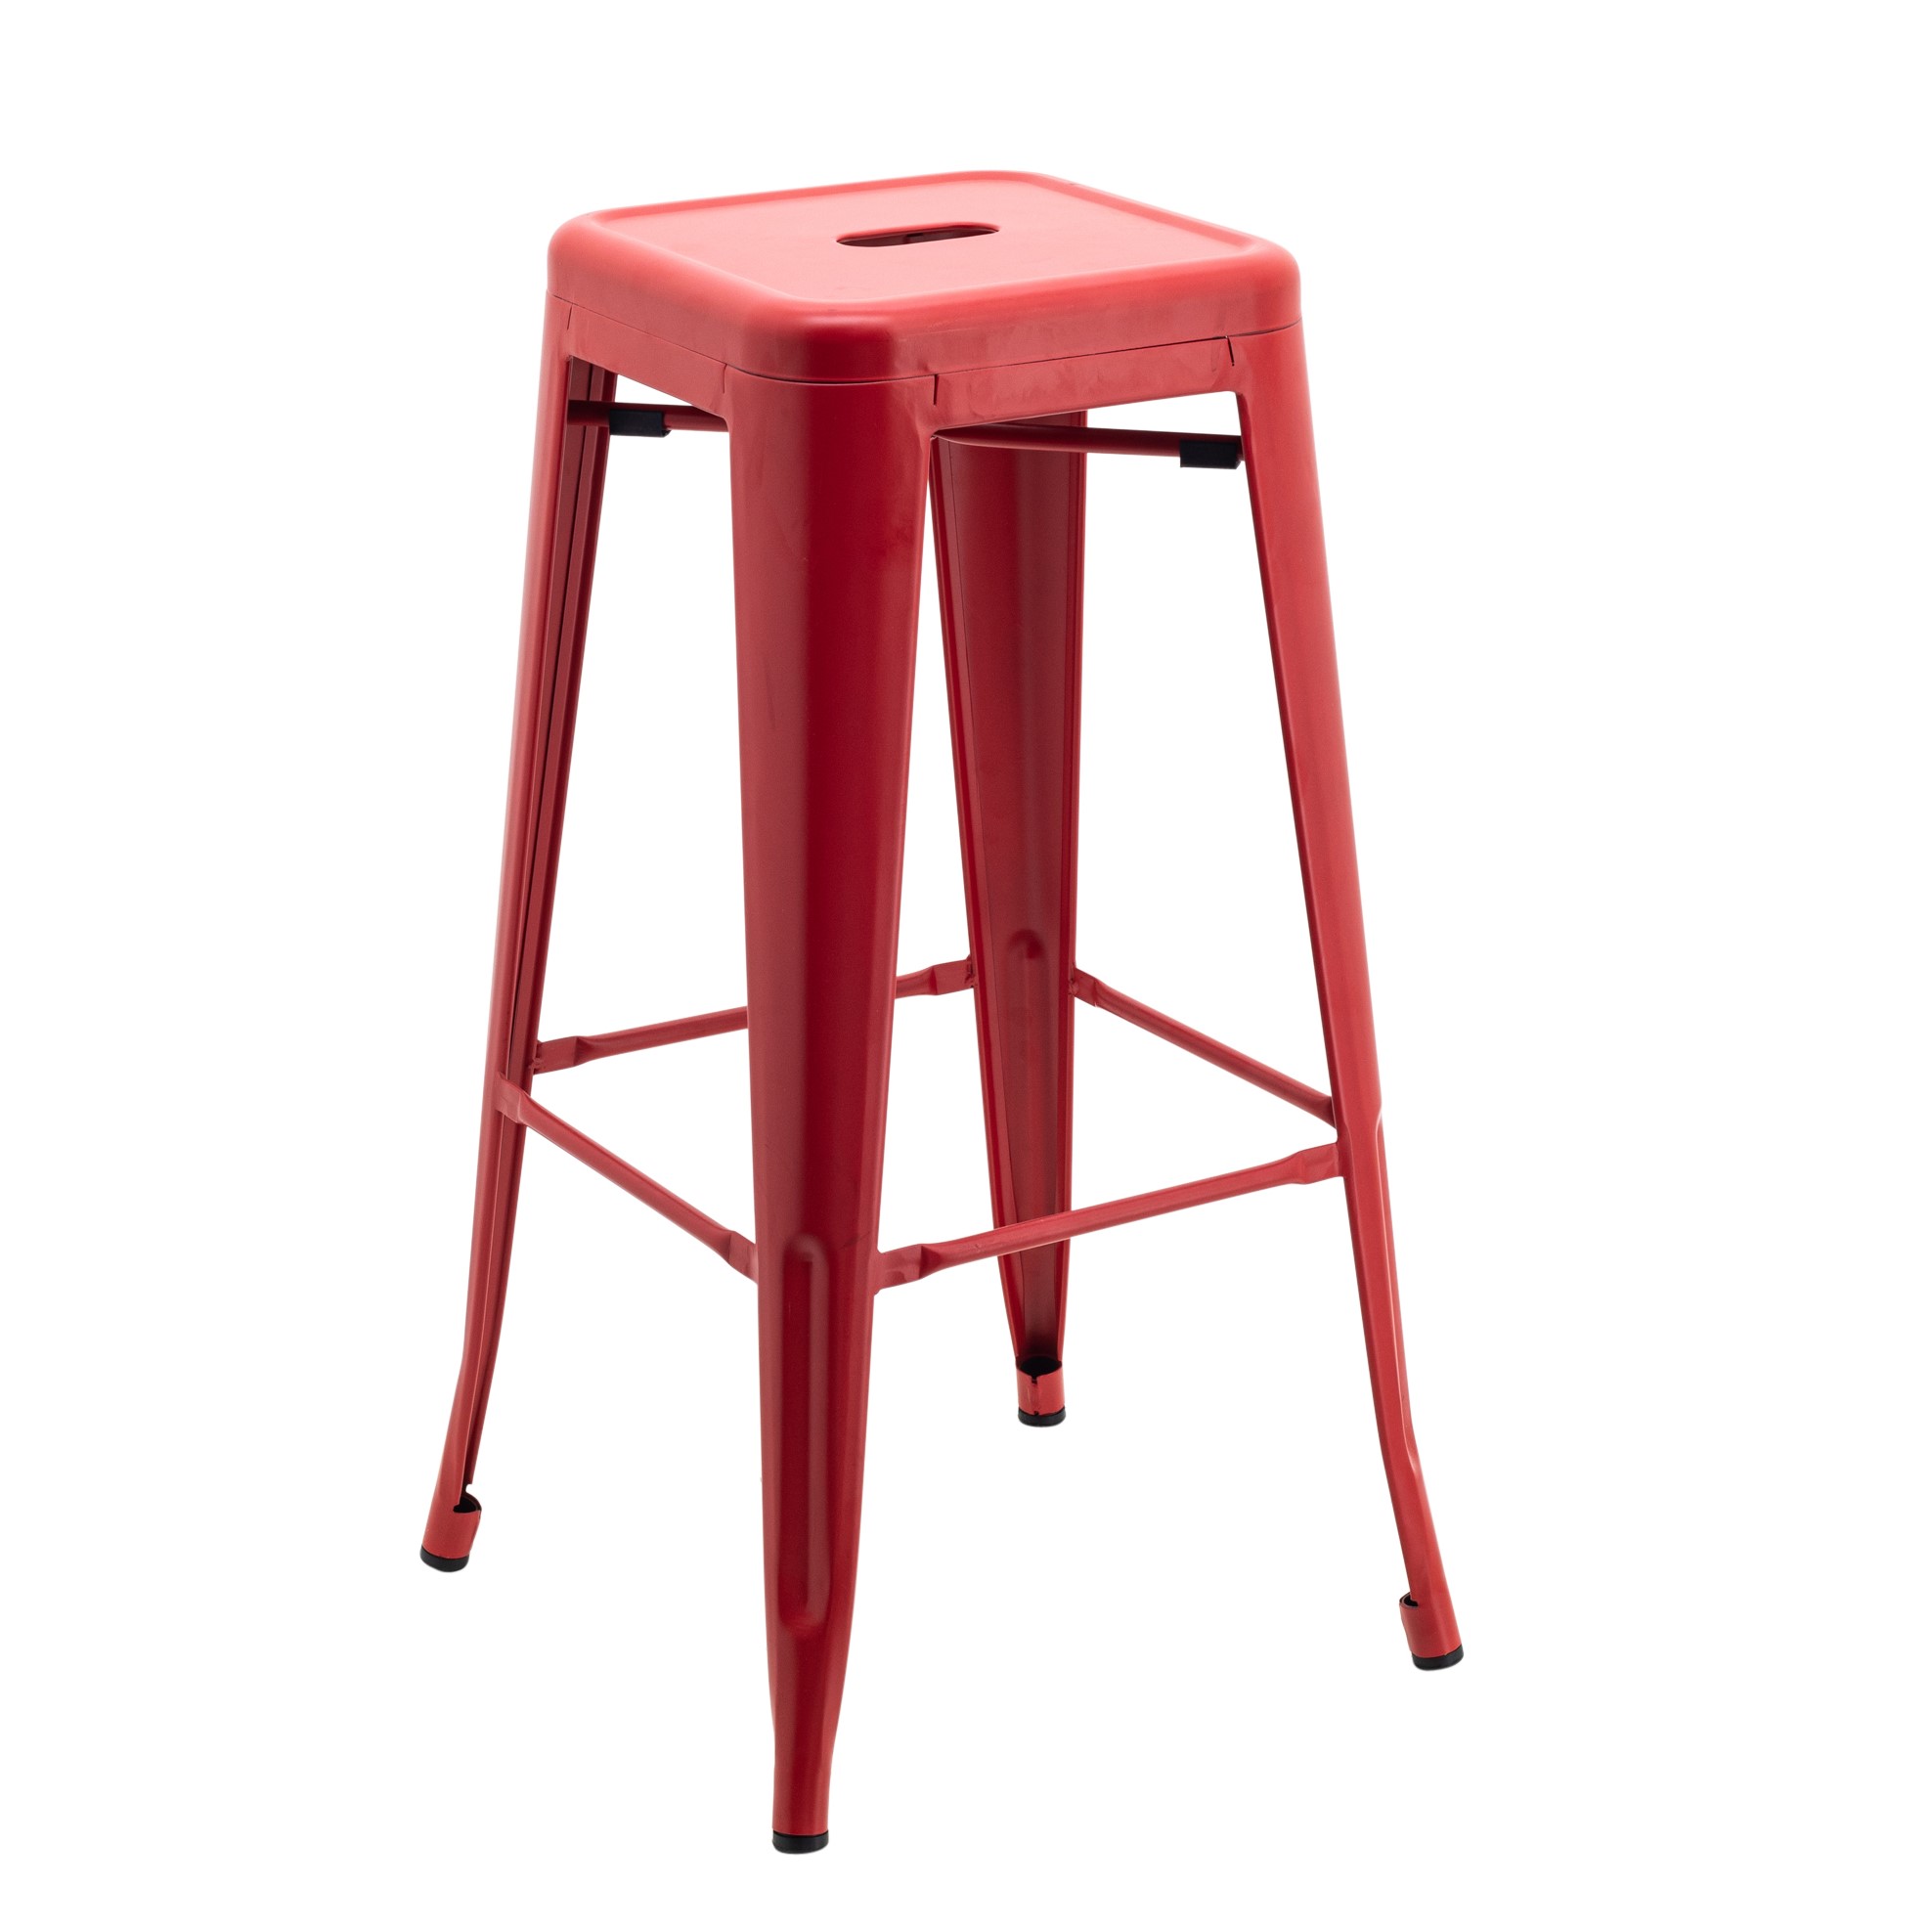 Tall Replica Tolix Stool in Matte Red